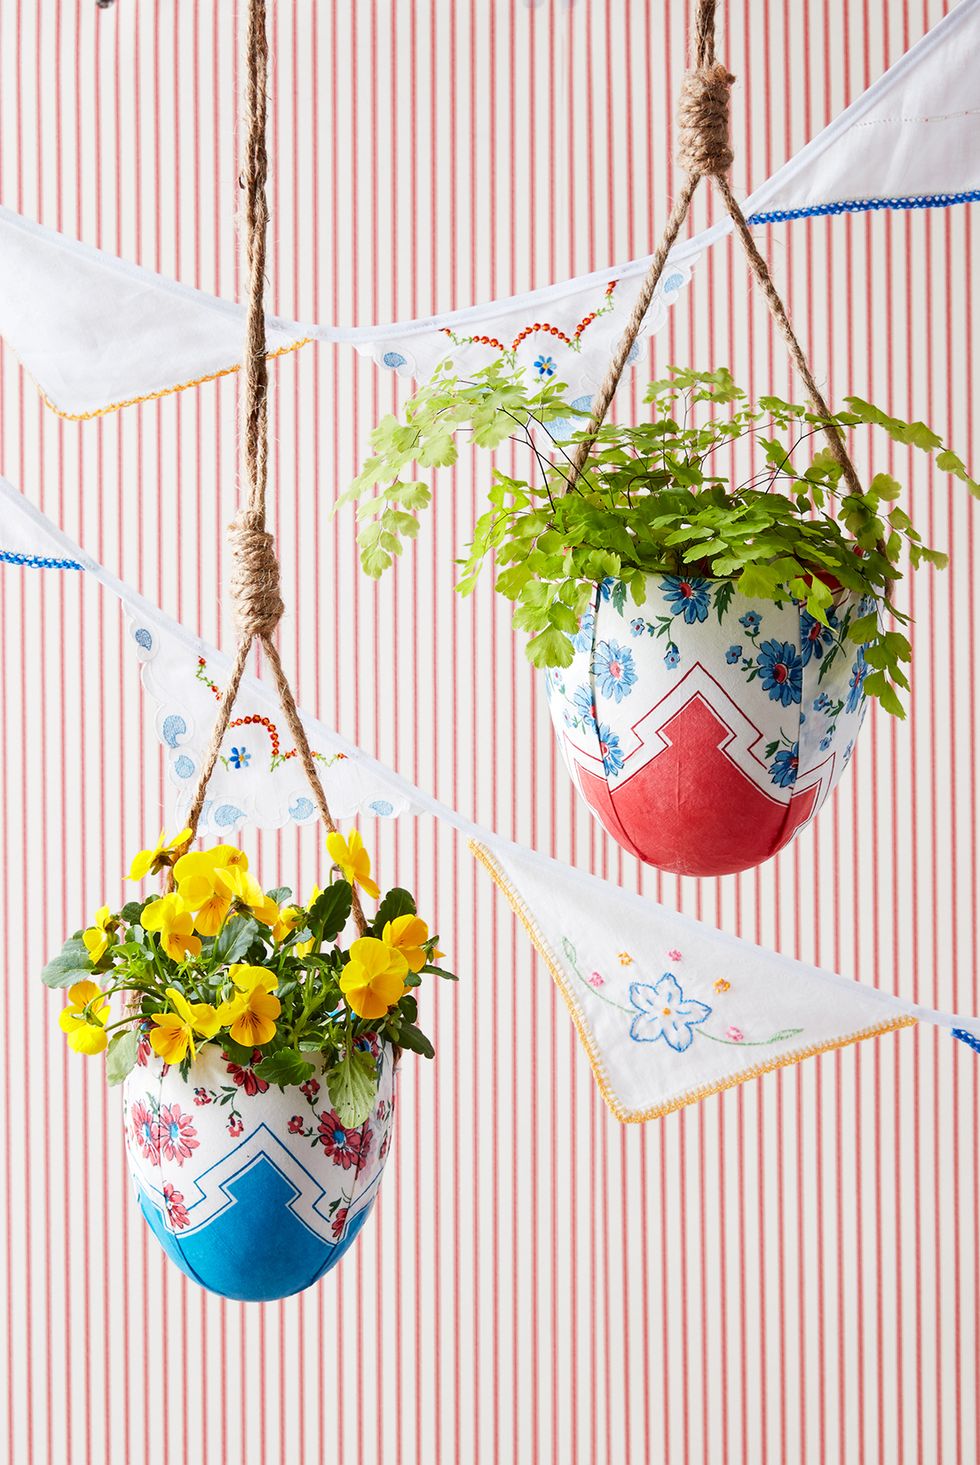 16. Patterned Hanging Planters